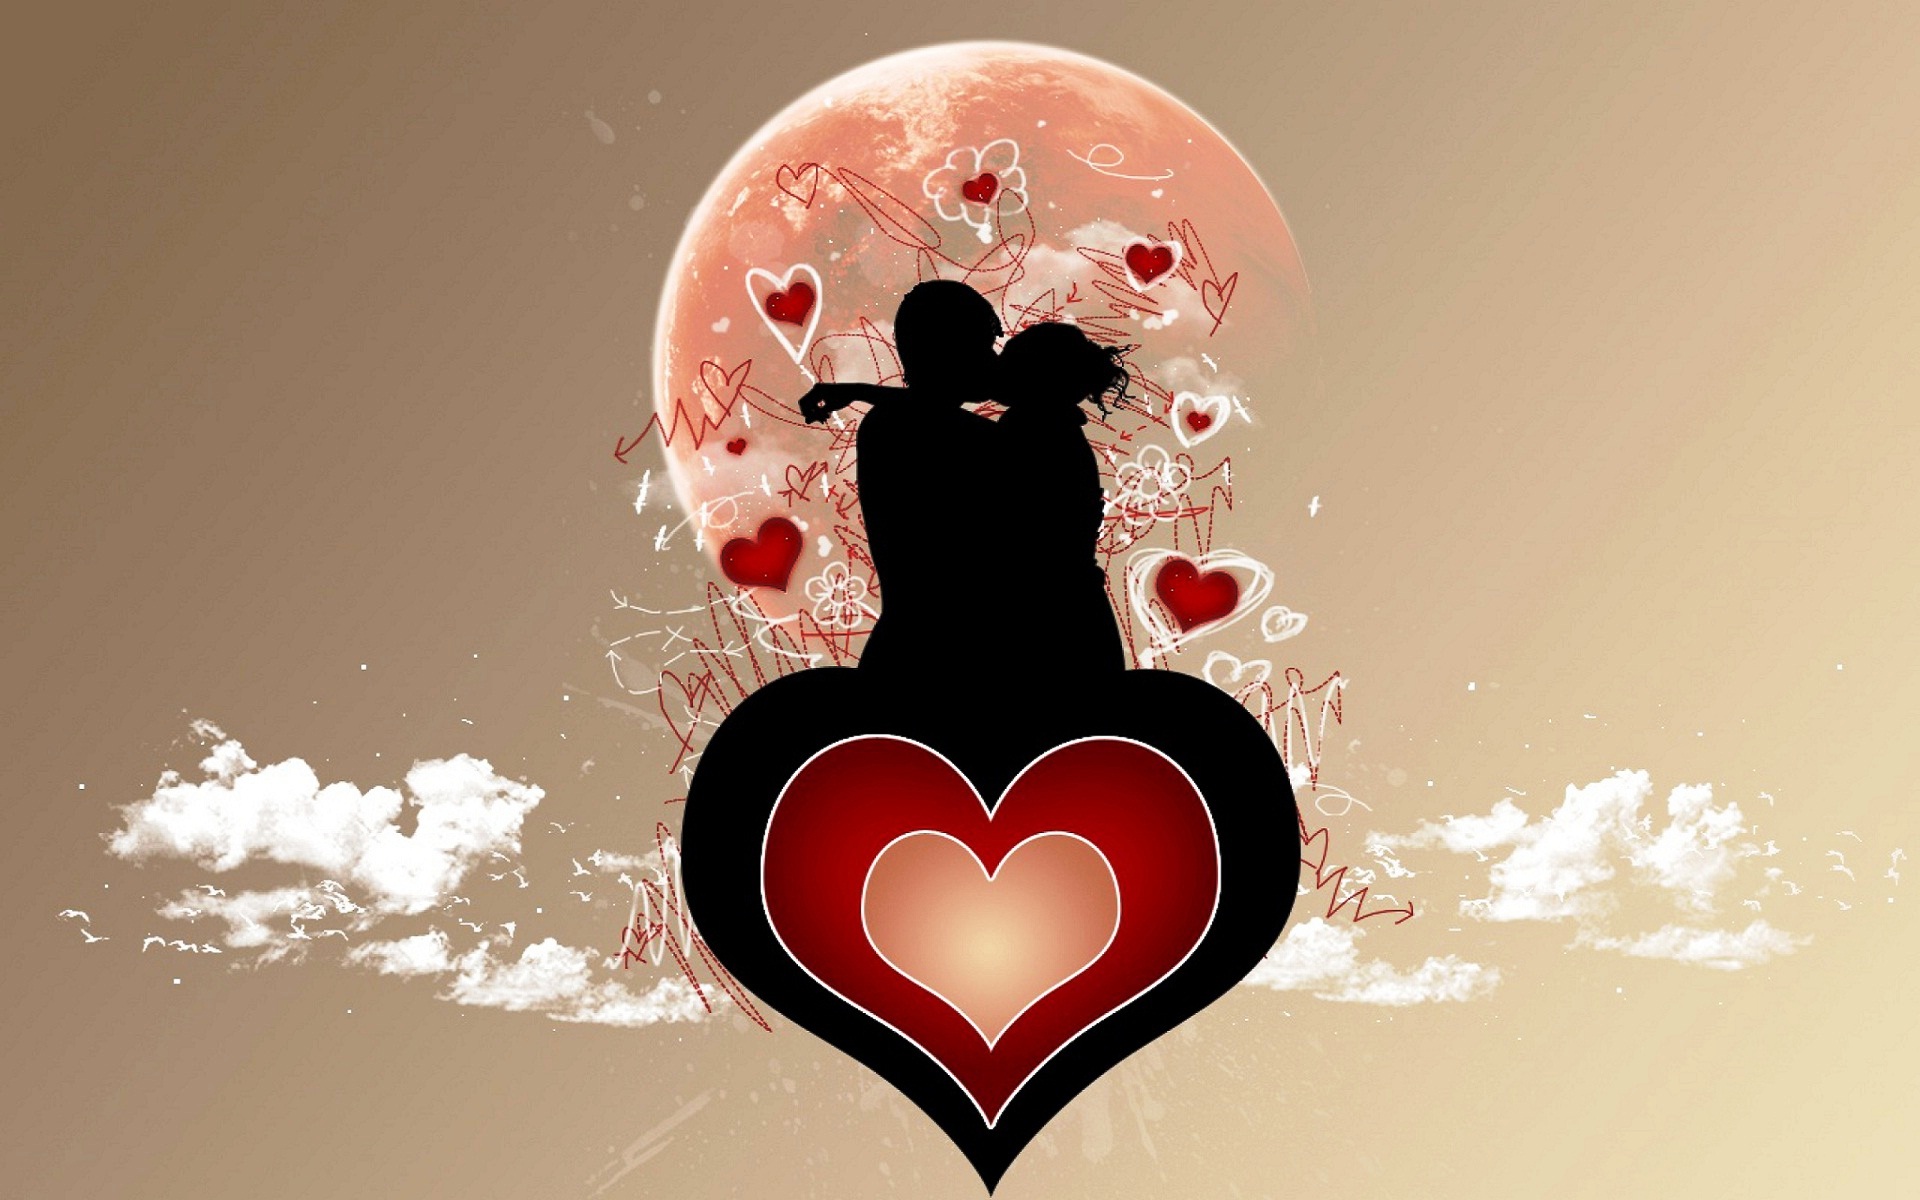 Two heart feeling love and romance - New hd wallpaperNew hd wallpaper